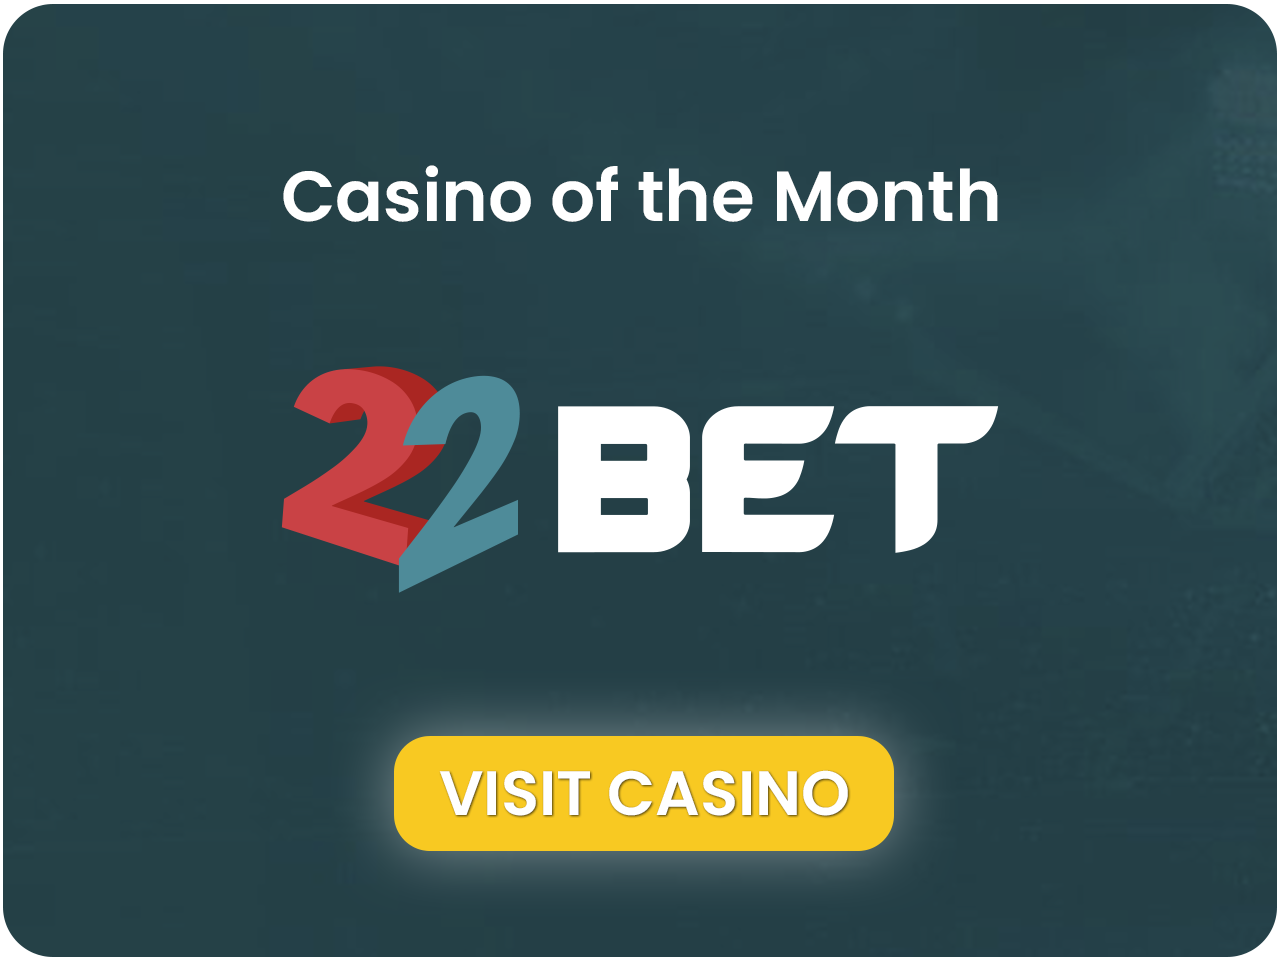 22Bet Casino of the month